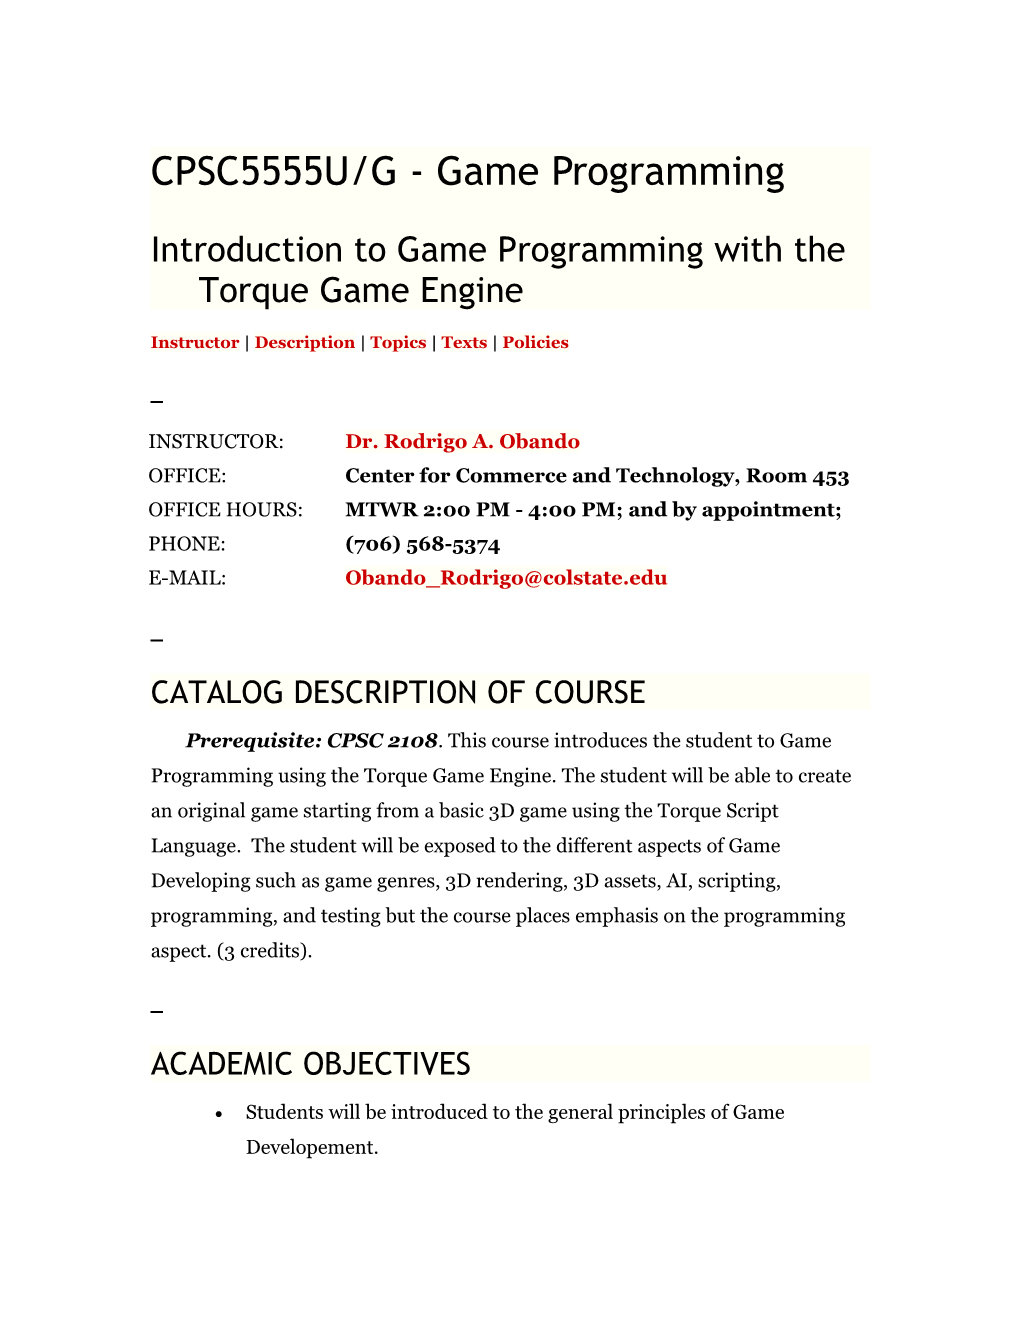 Introduction to Game Programming with the Torque Game Engine